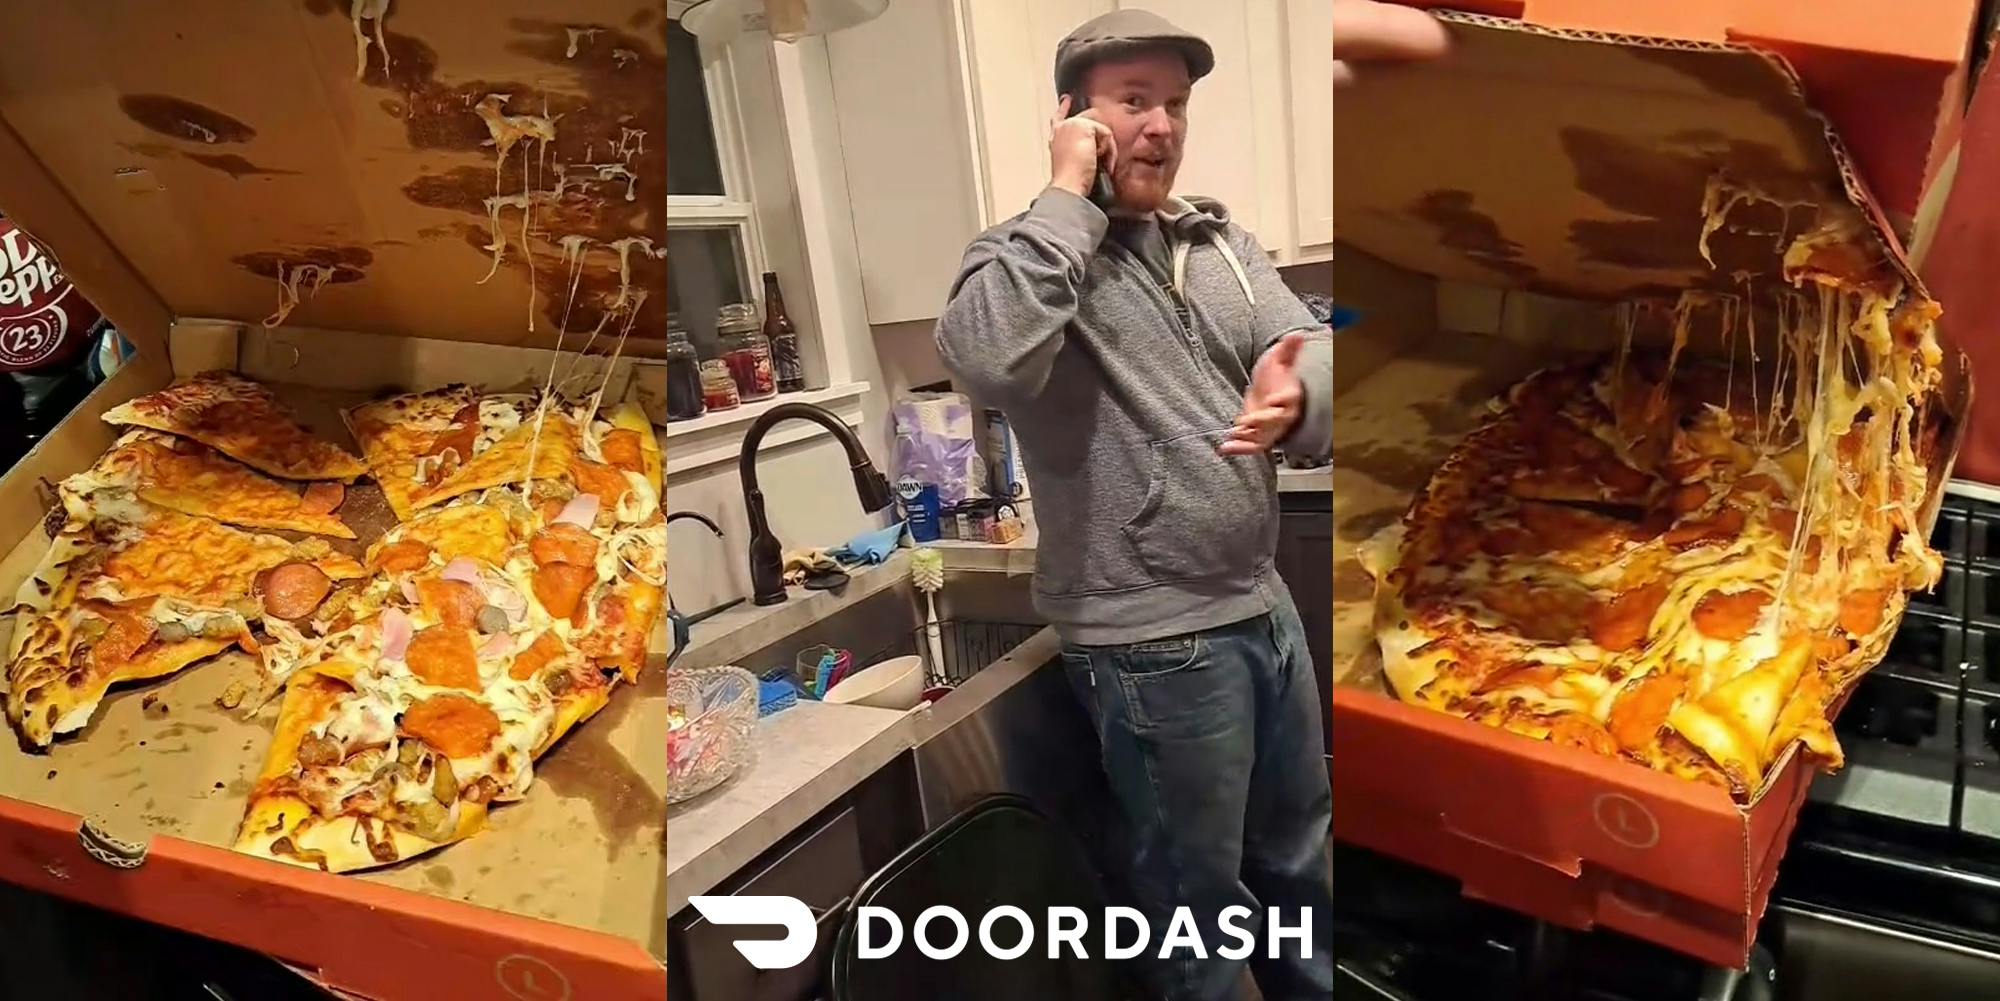 mangled pizza in box (l) man speaking in kitchen on phone with DoorDash logo at bottom (c) mangled pizza in box on top of stove (r)